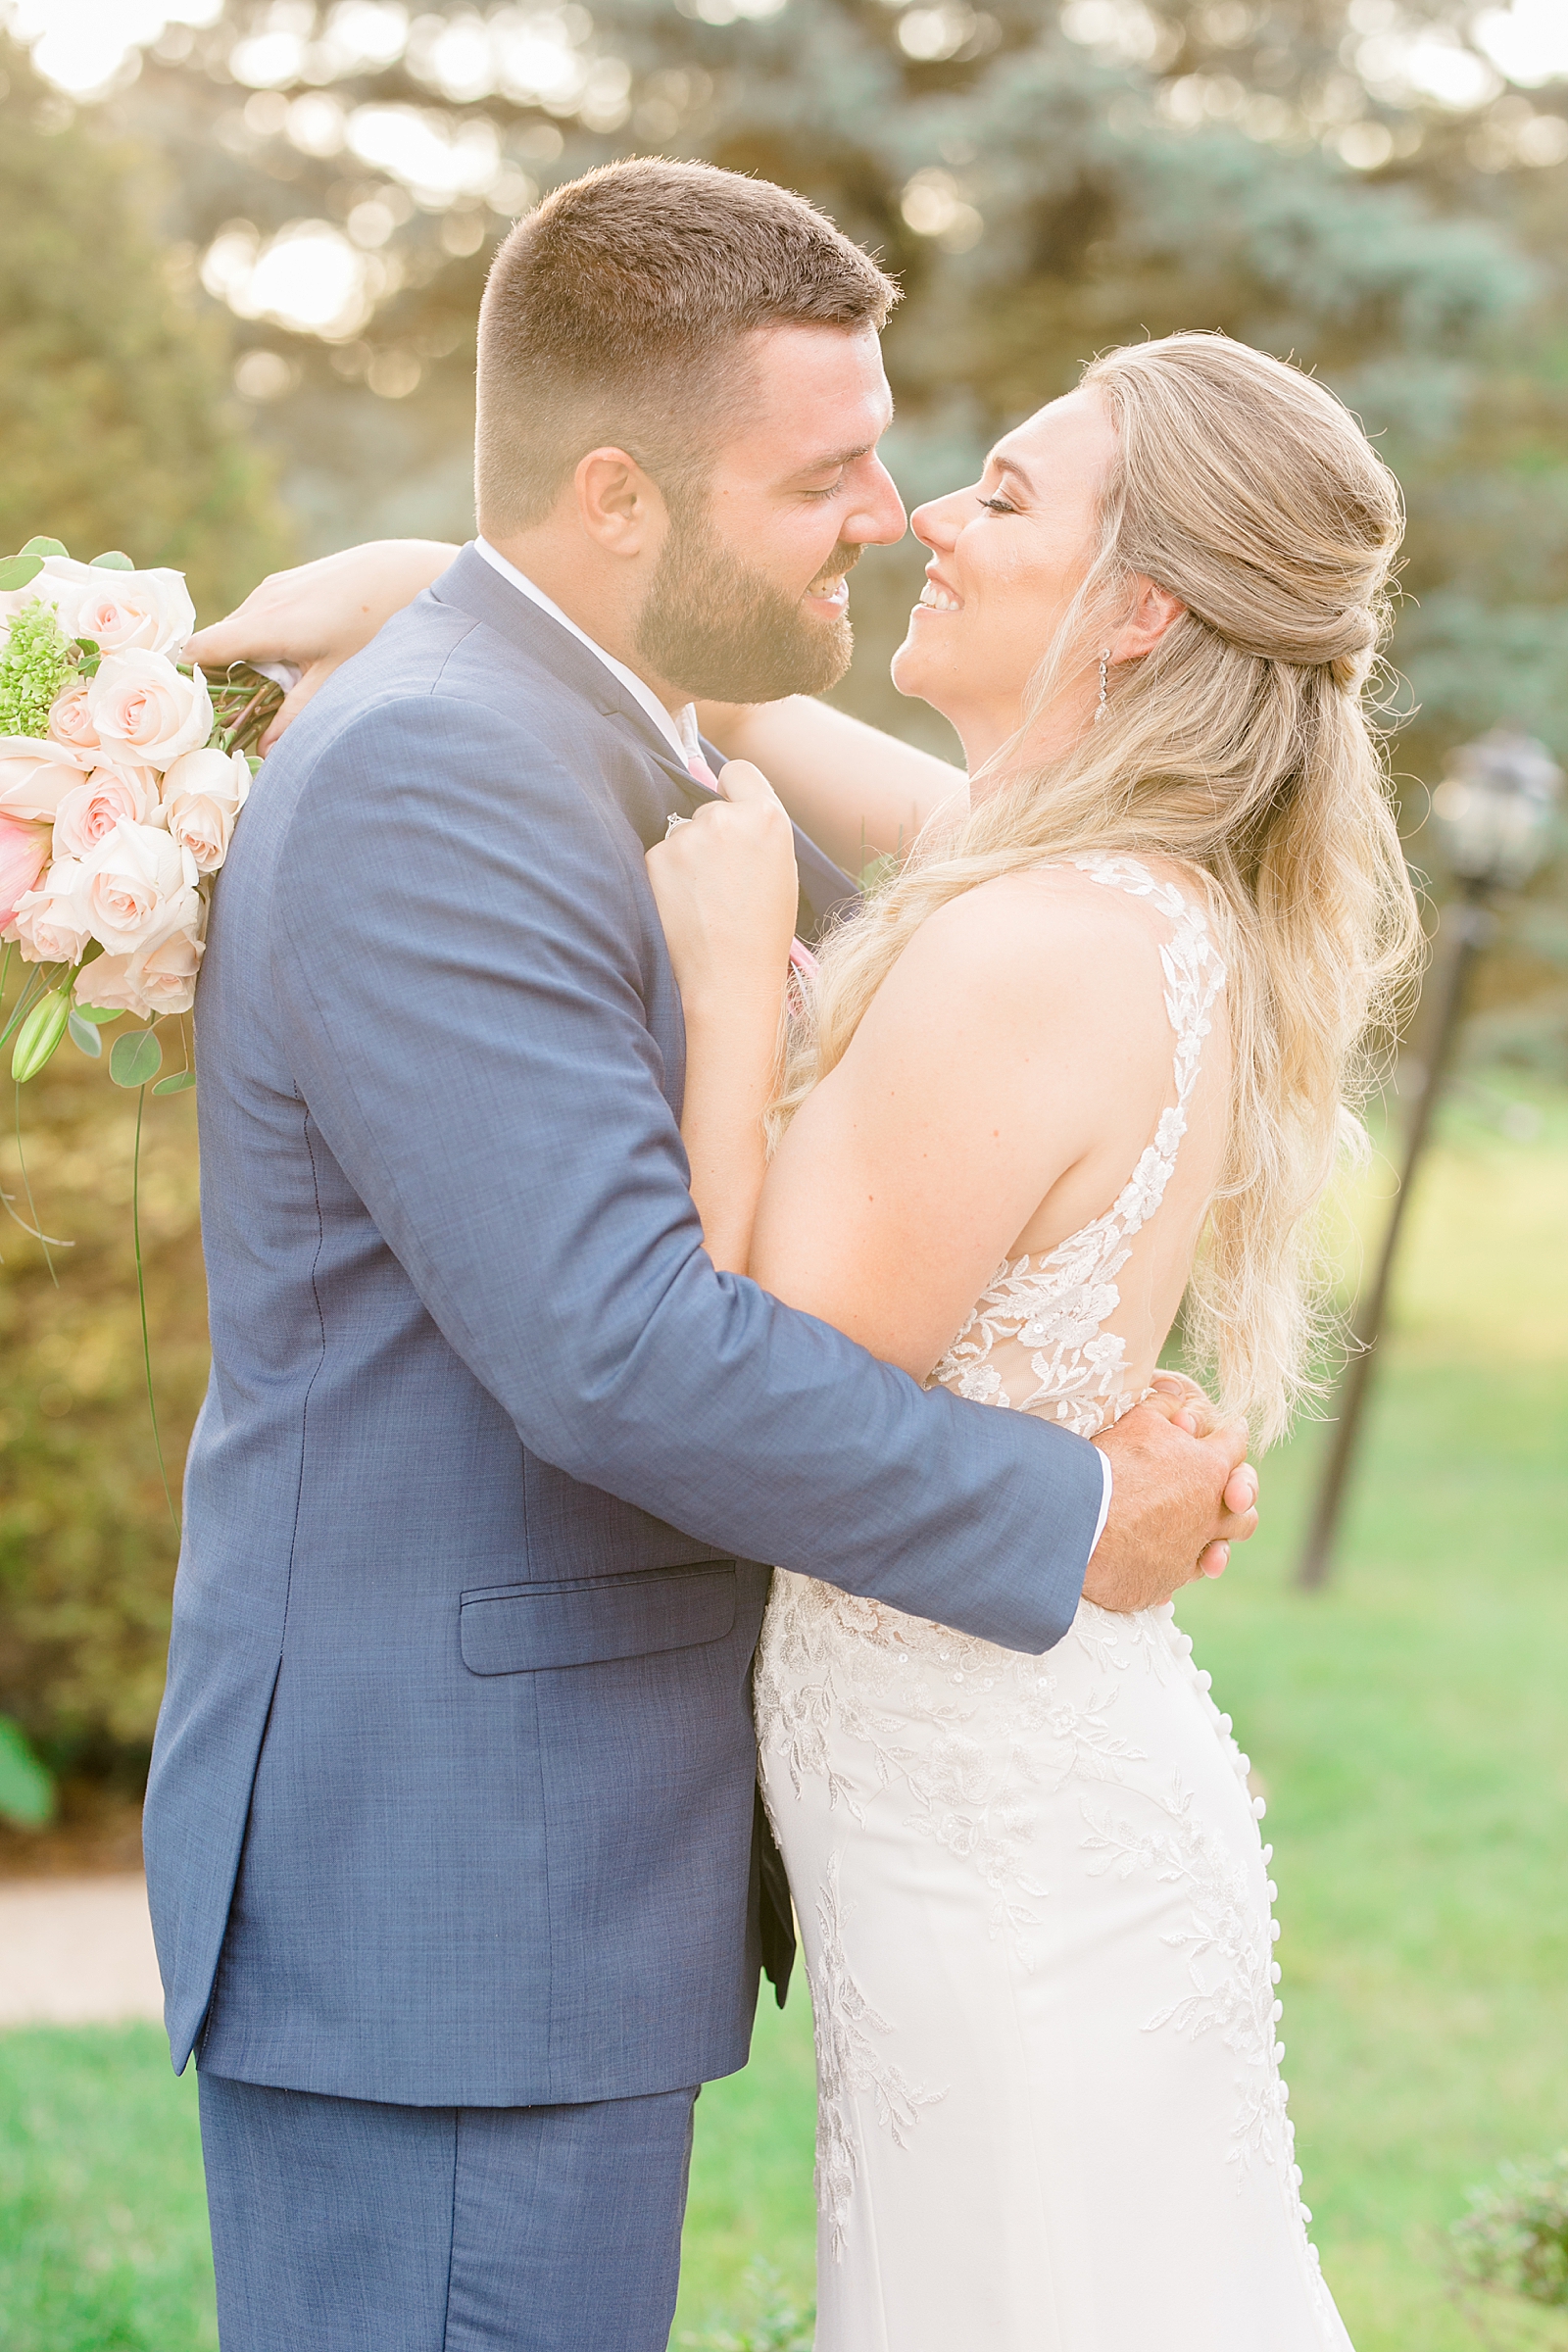 A Summer Wedding at Antrim 1844 by Costola Photography